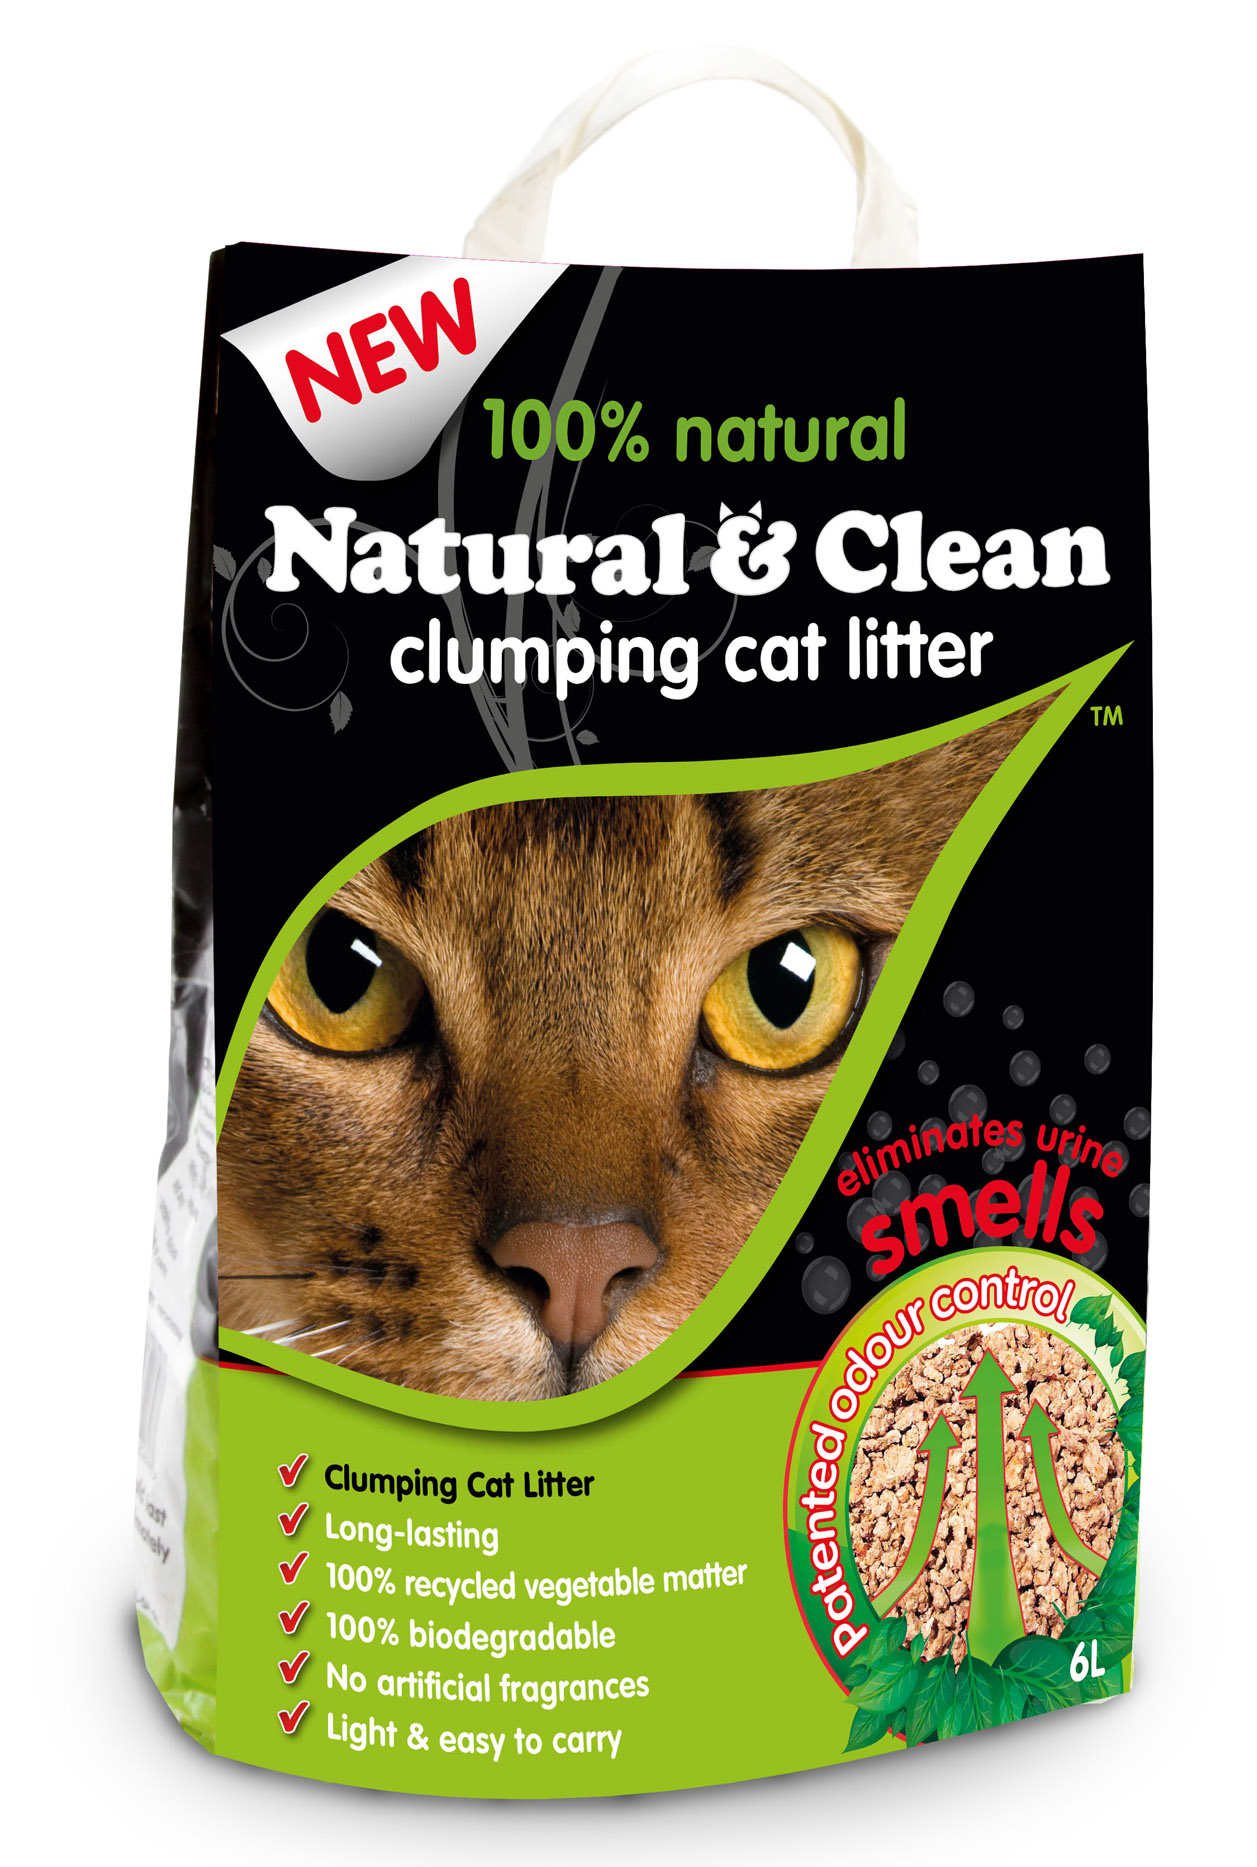 UK Landfill Tax at Tipping Point Is Biodegradable Cat Litter a Solution?